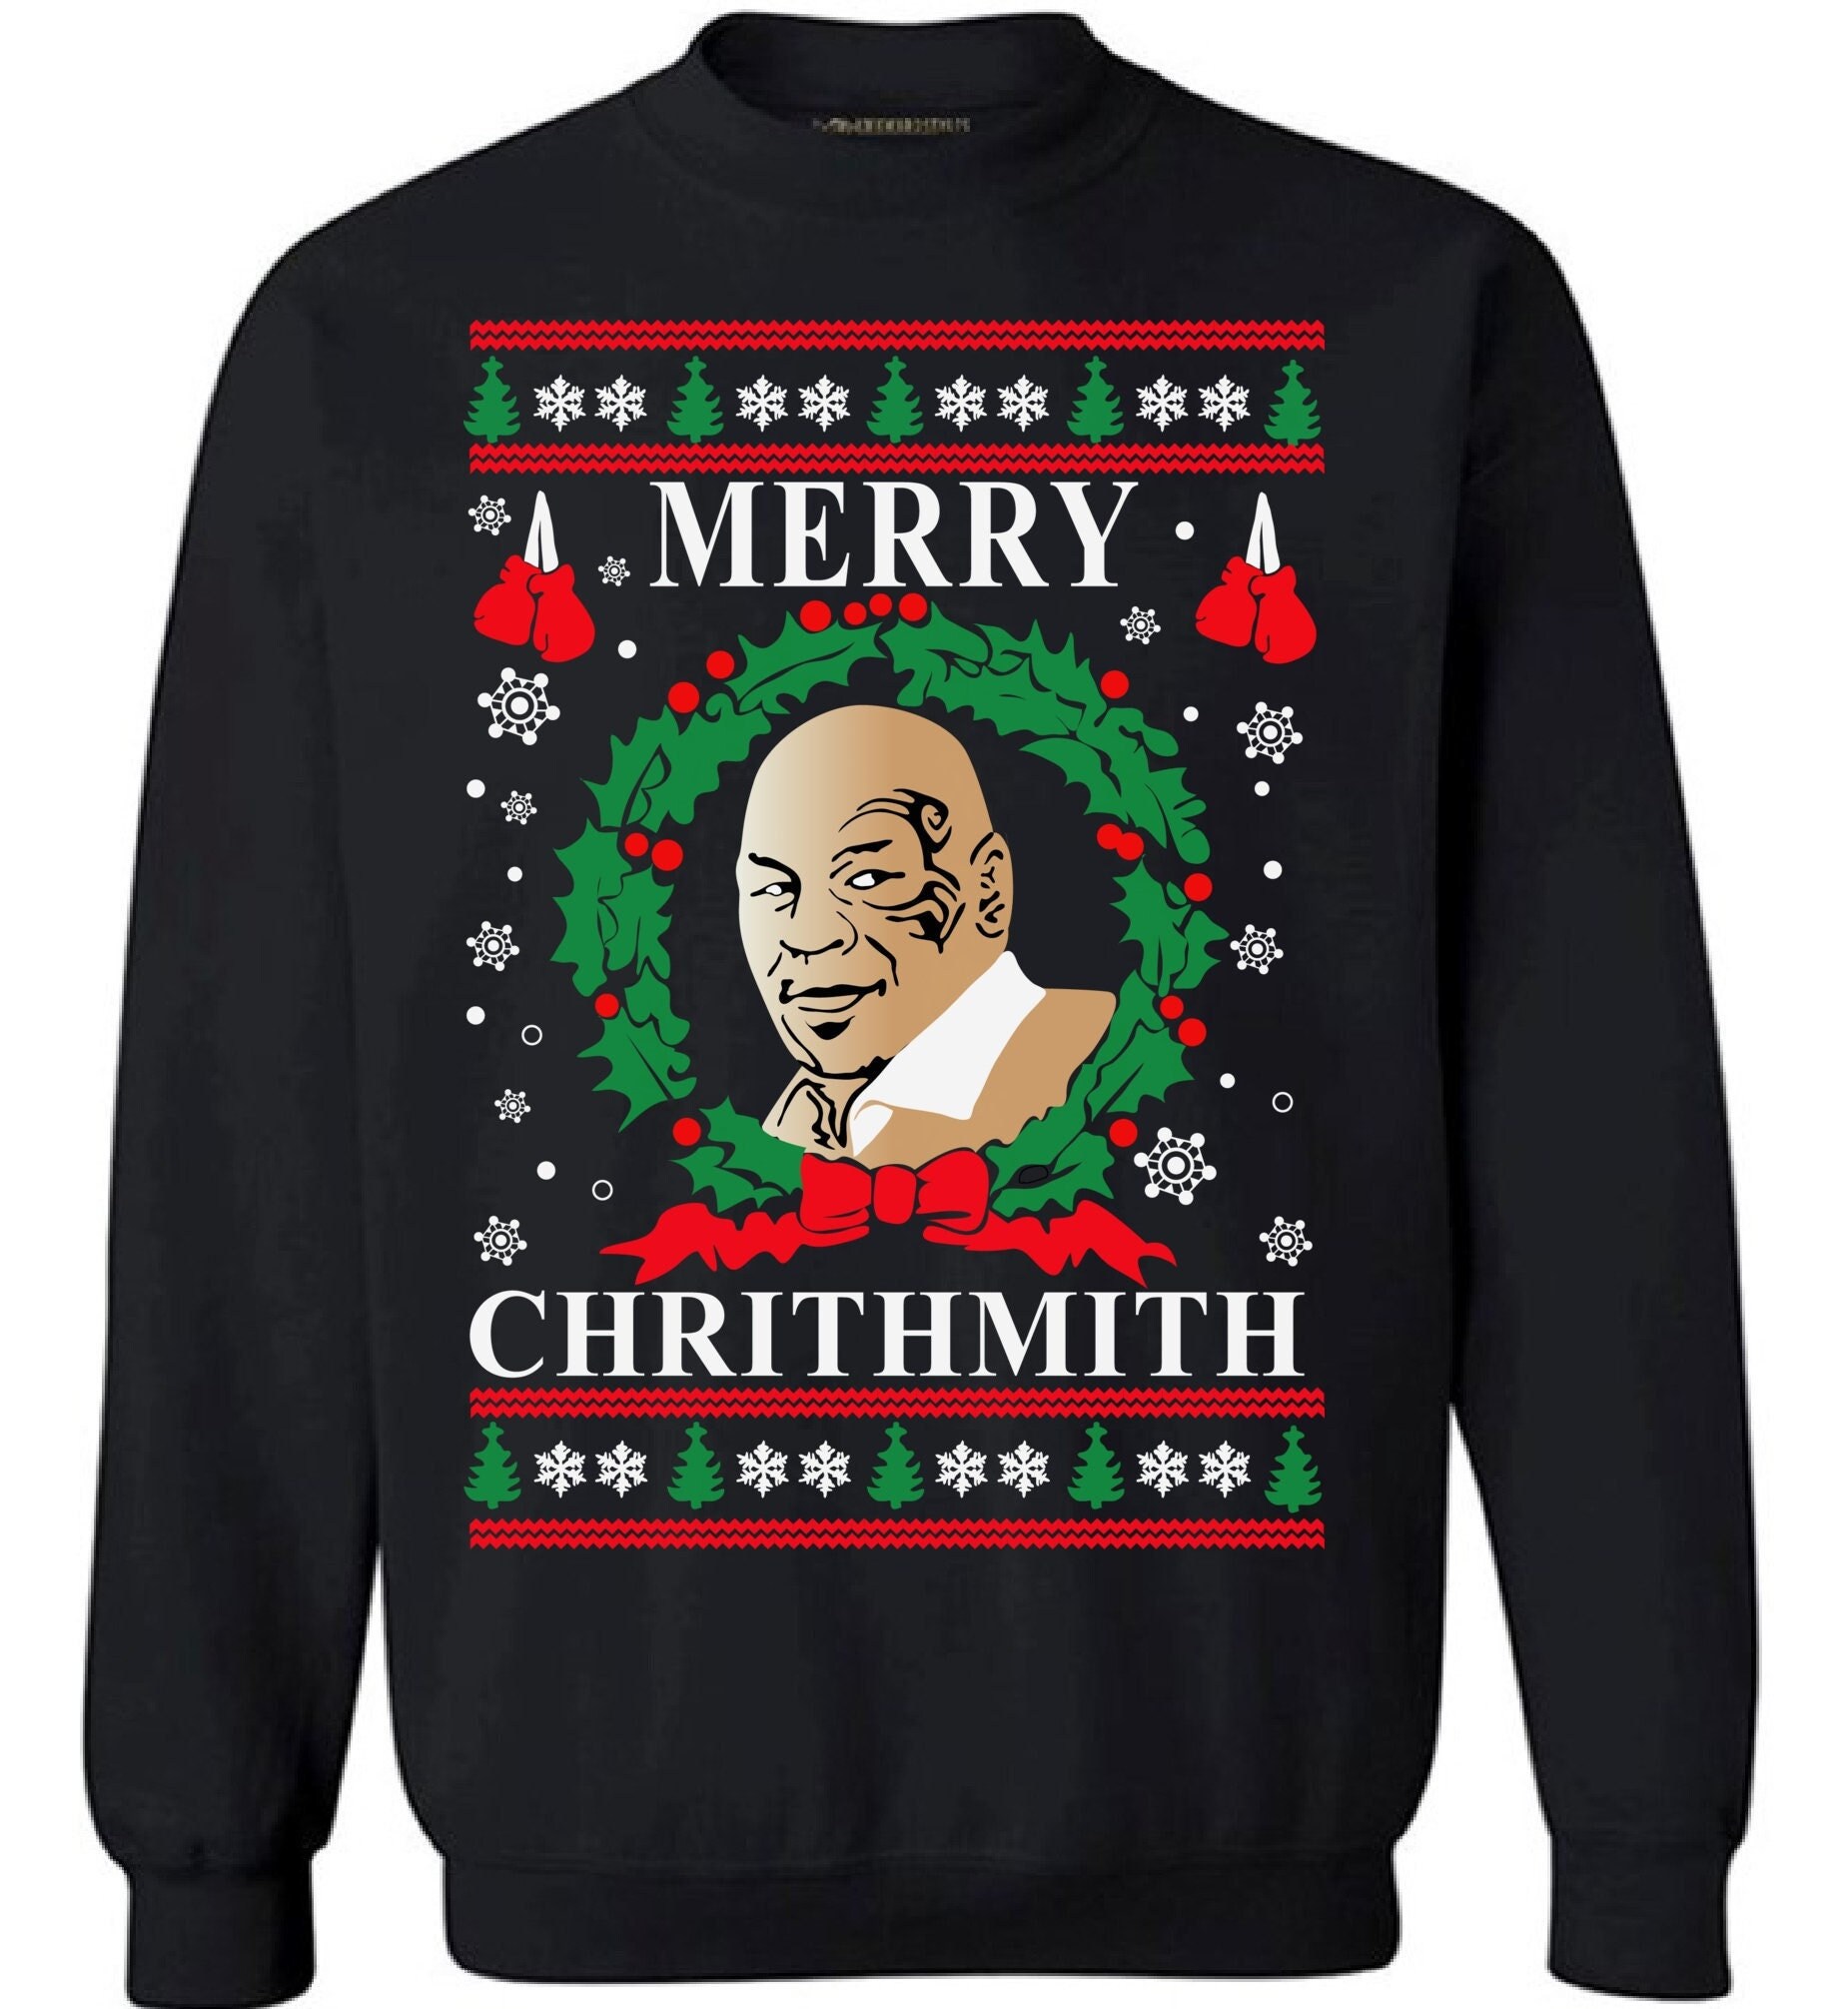 Discover Ugly Christmas Sweater Mike Tyson Christmas Sweater Merry Chrithmith